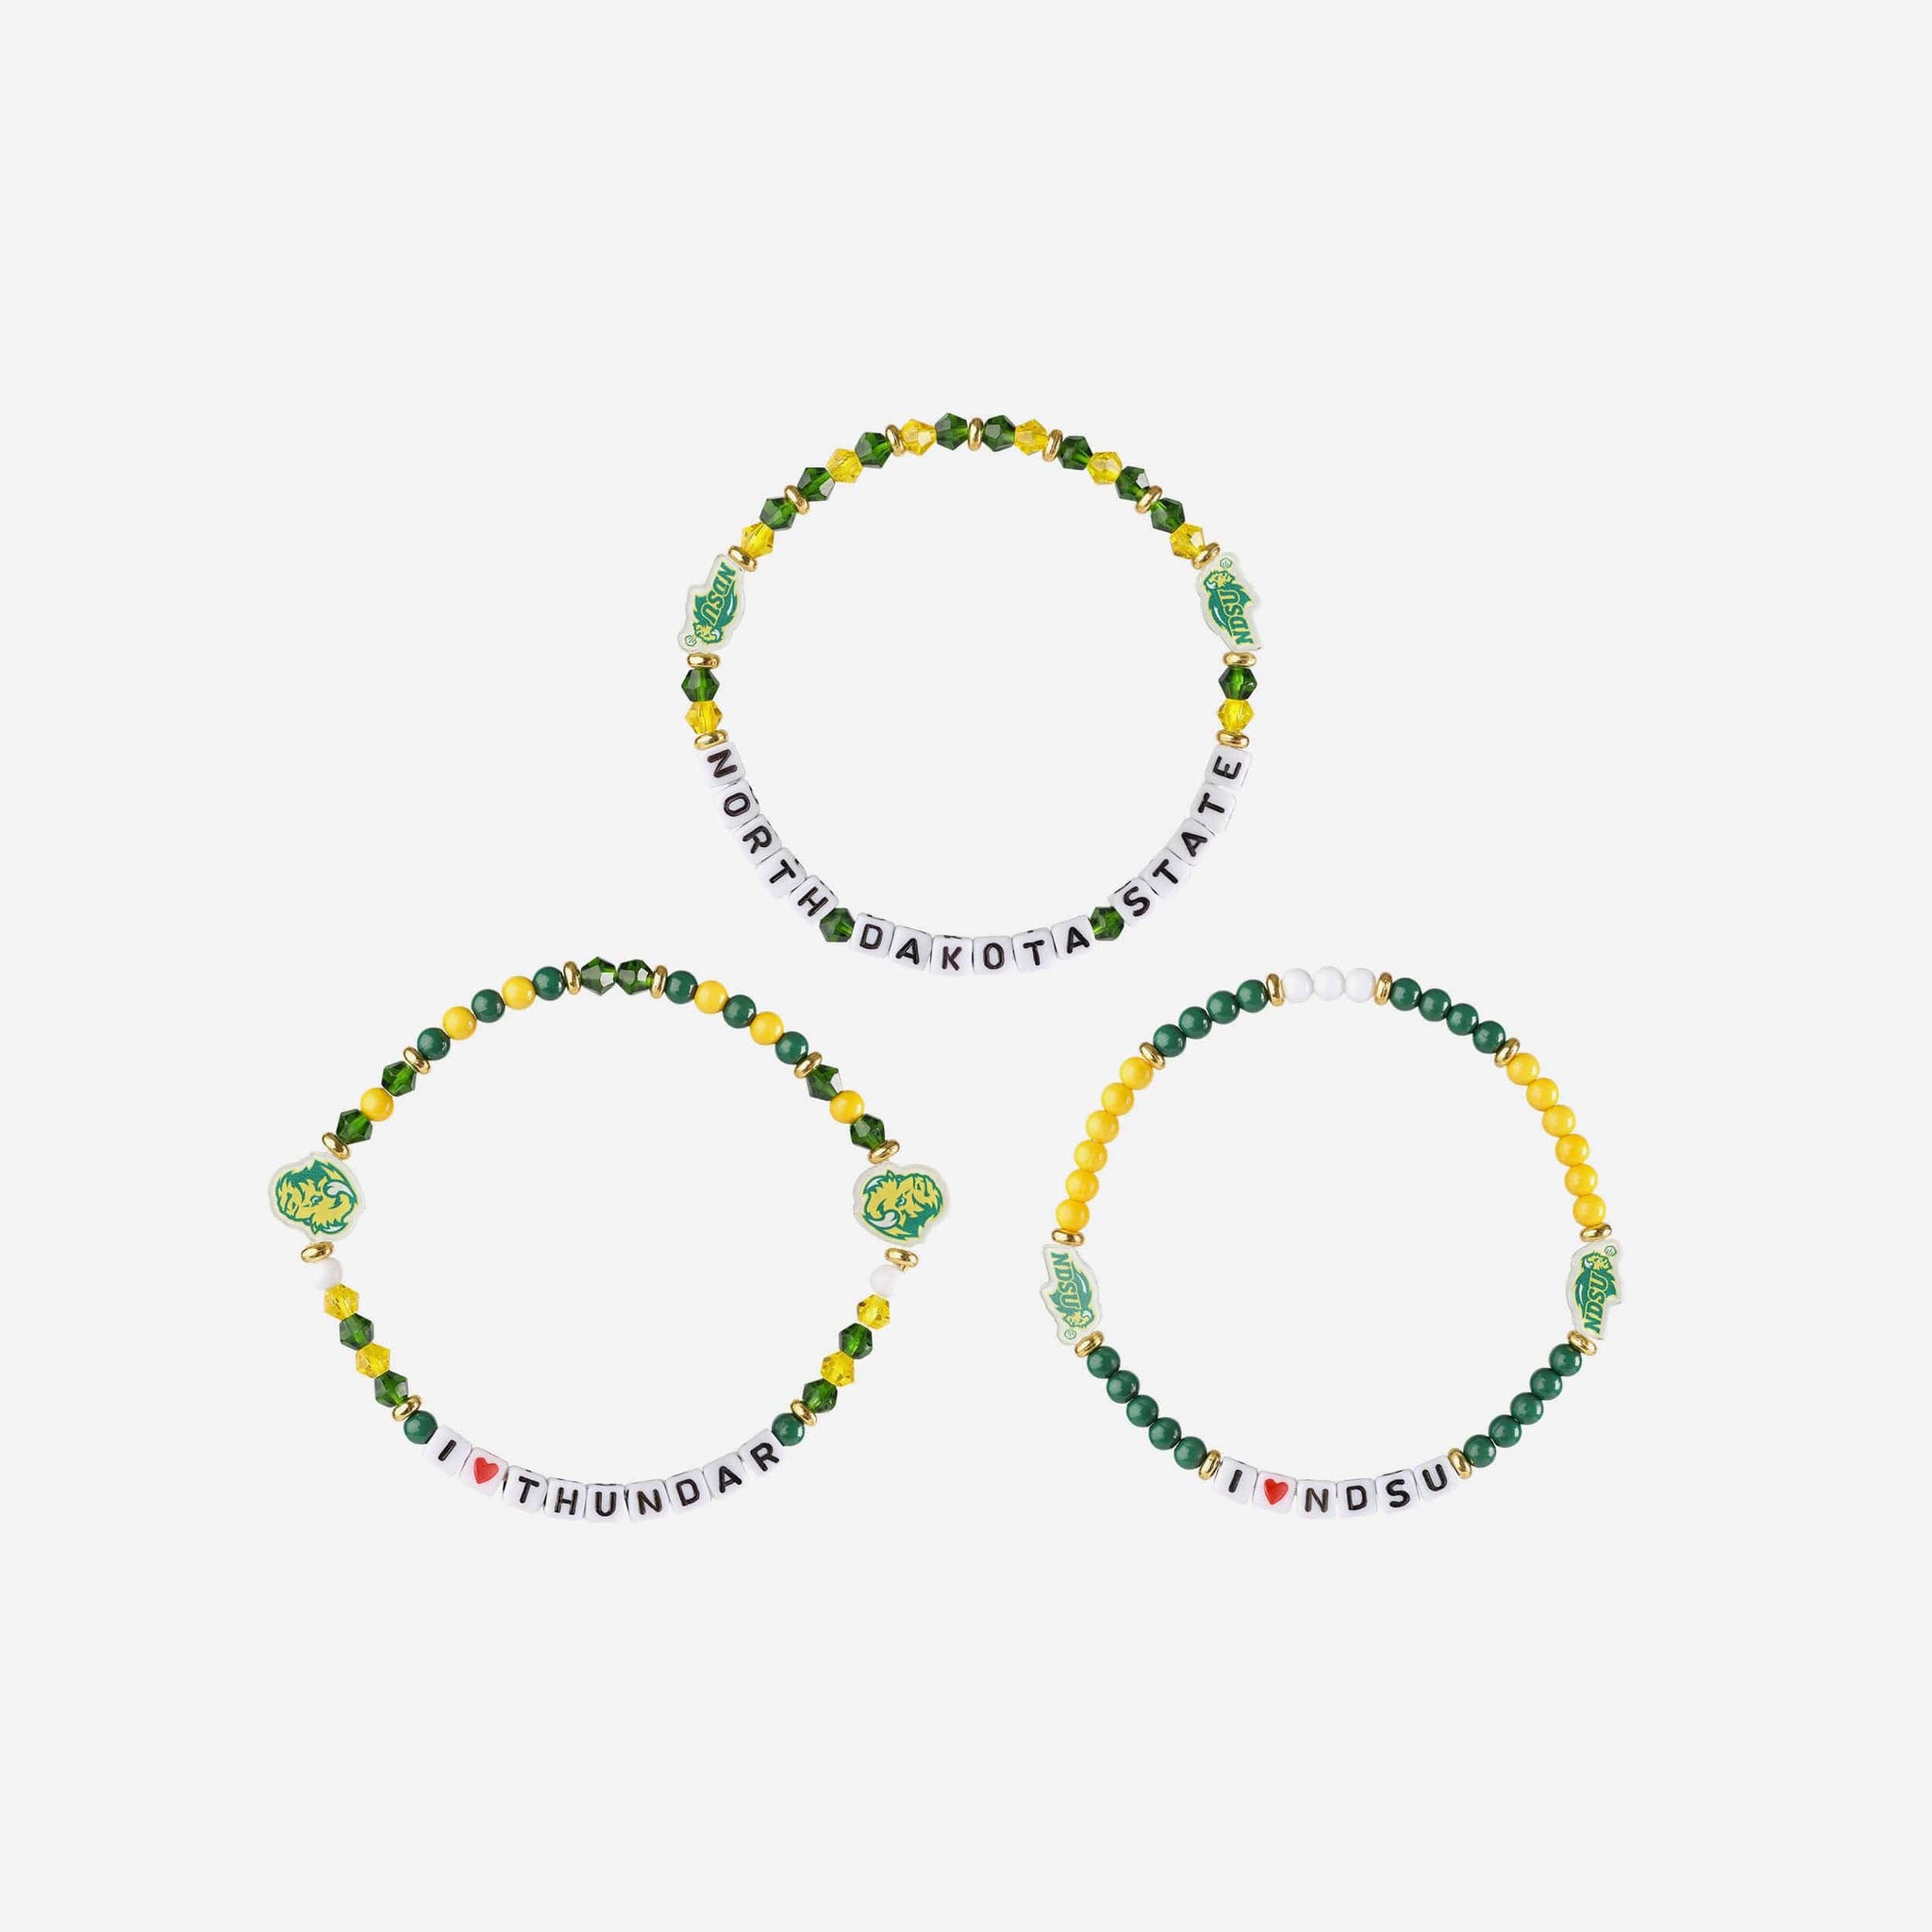 Linked in bio 🔗 This friendship bracelet kit has all the letters and